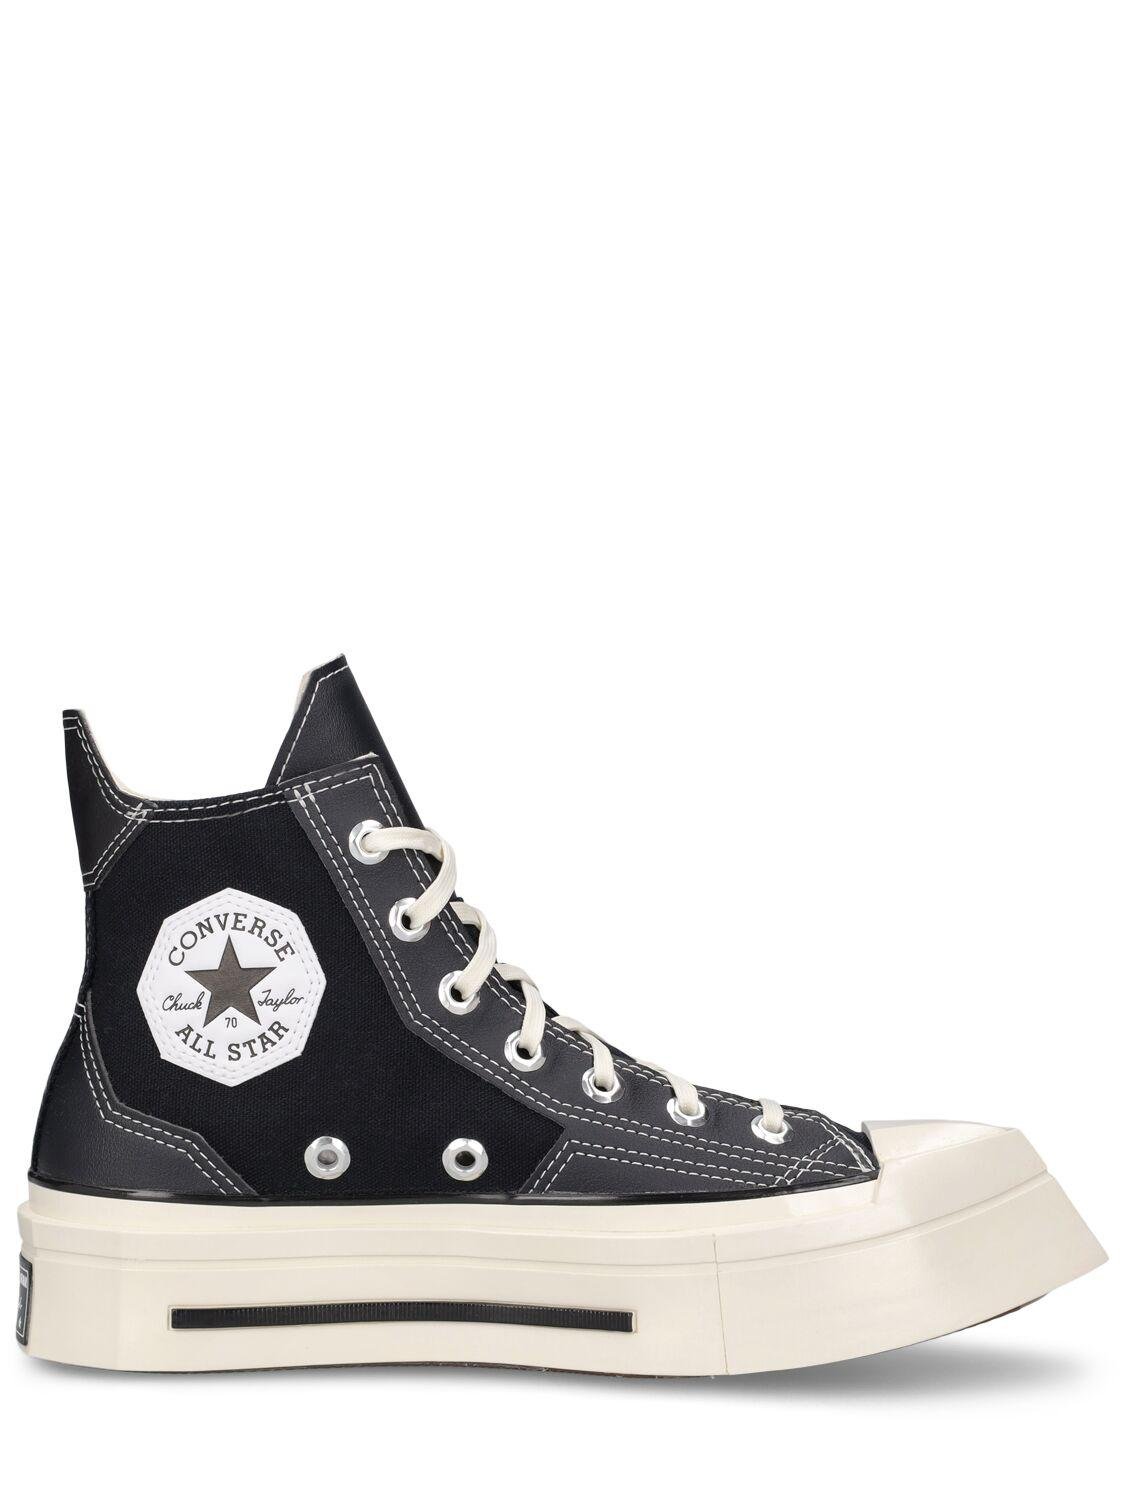 Chuck 70 De Luxe Squared Sneakers by CONVERSE